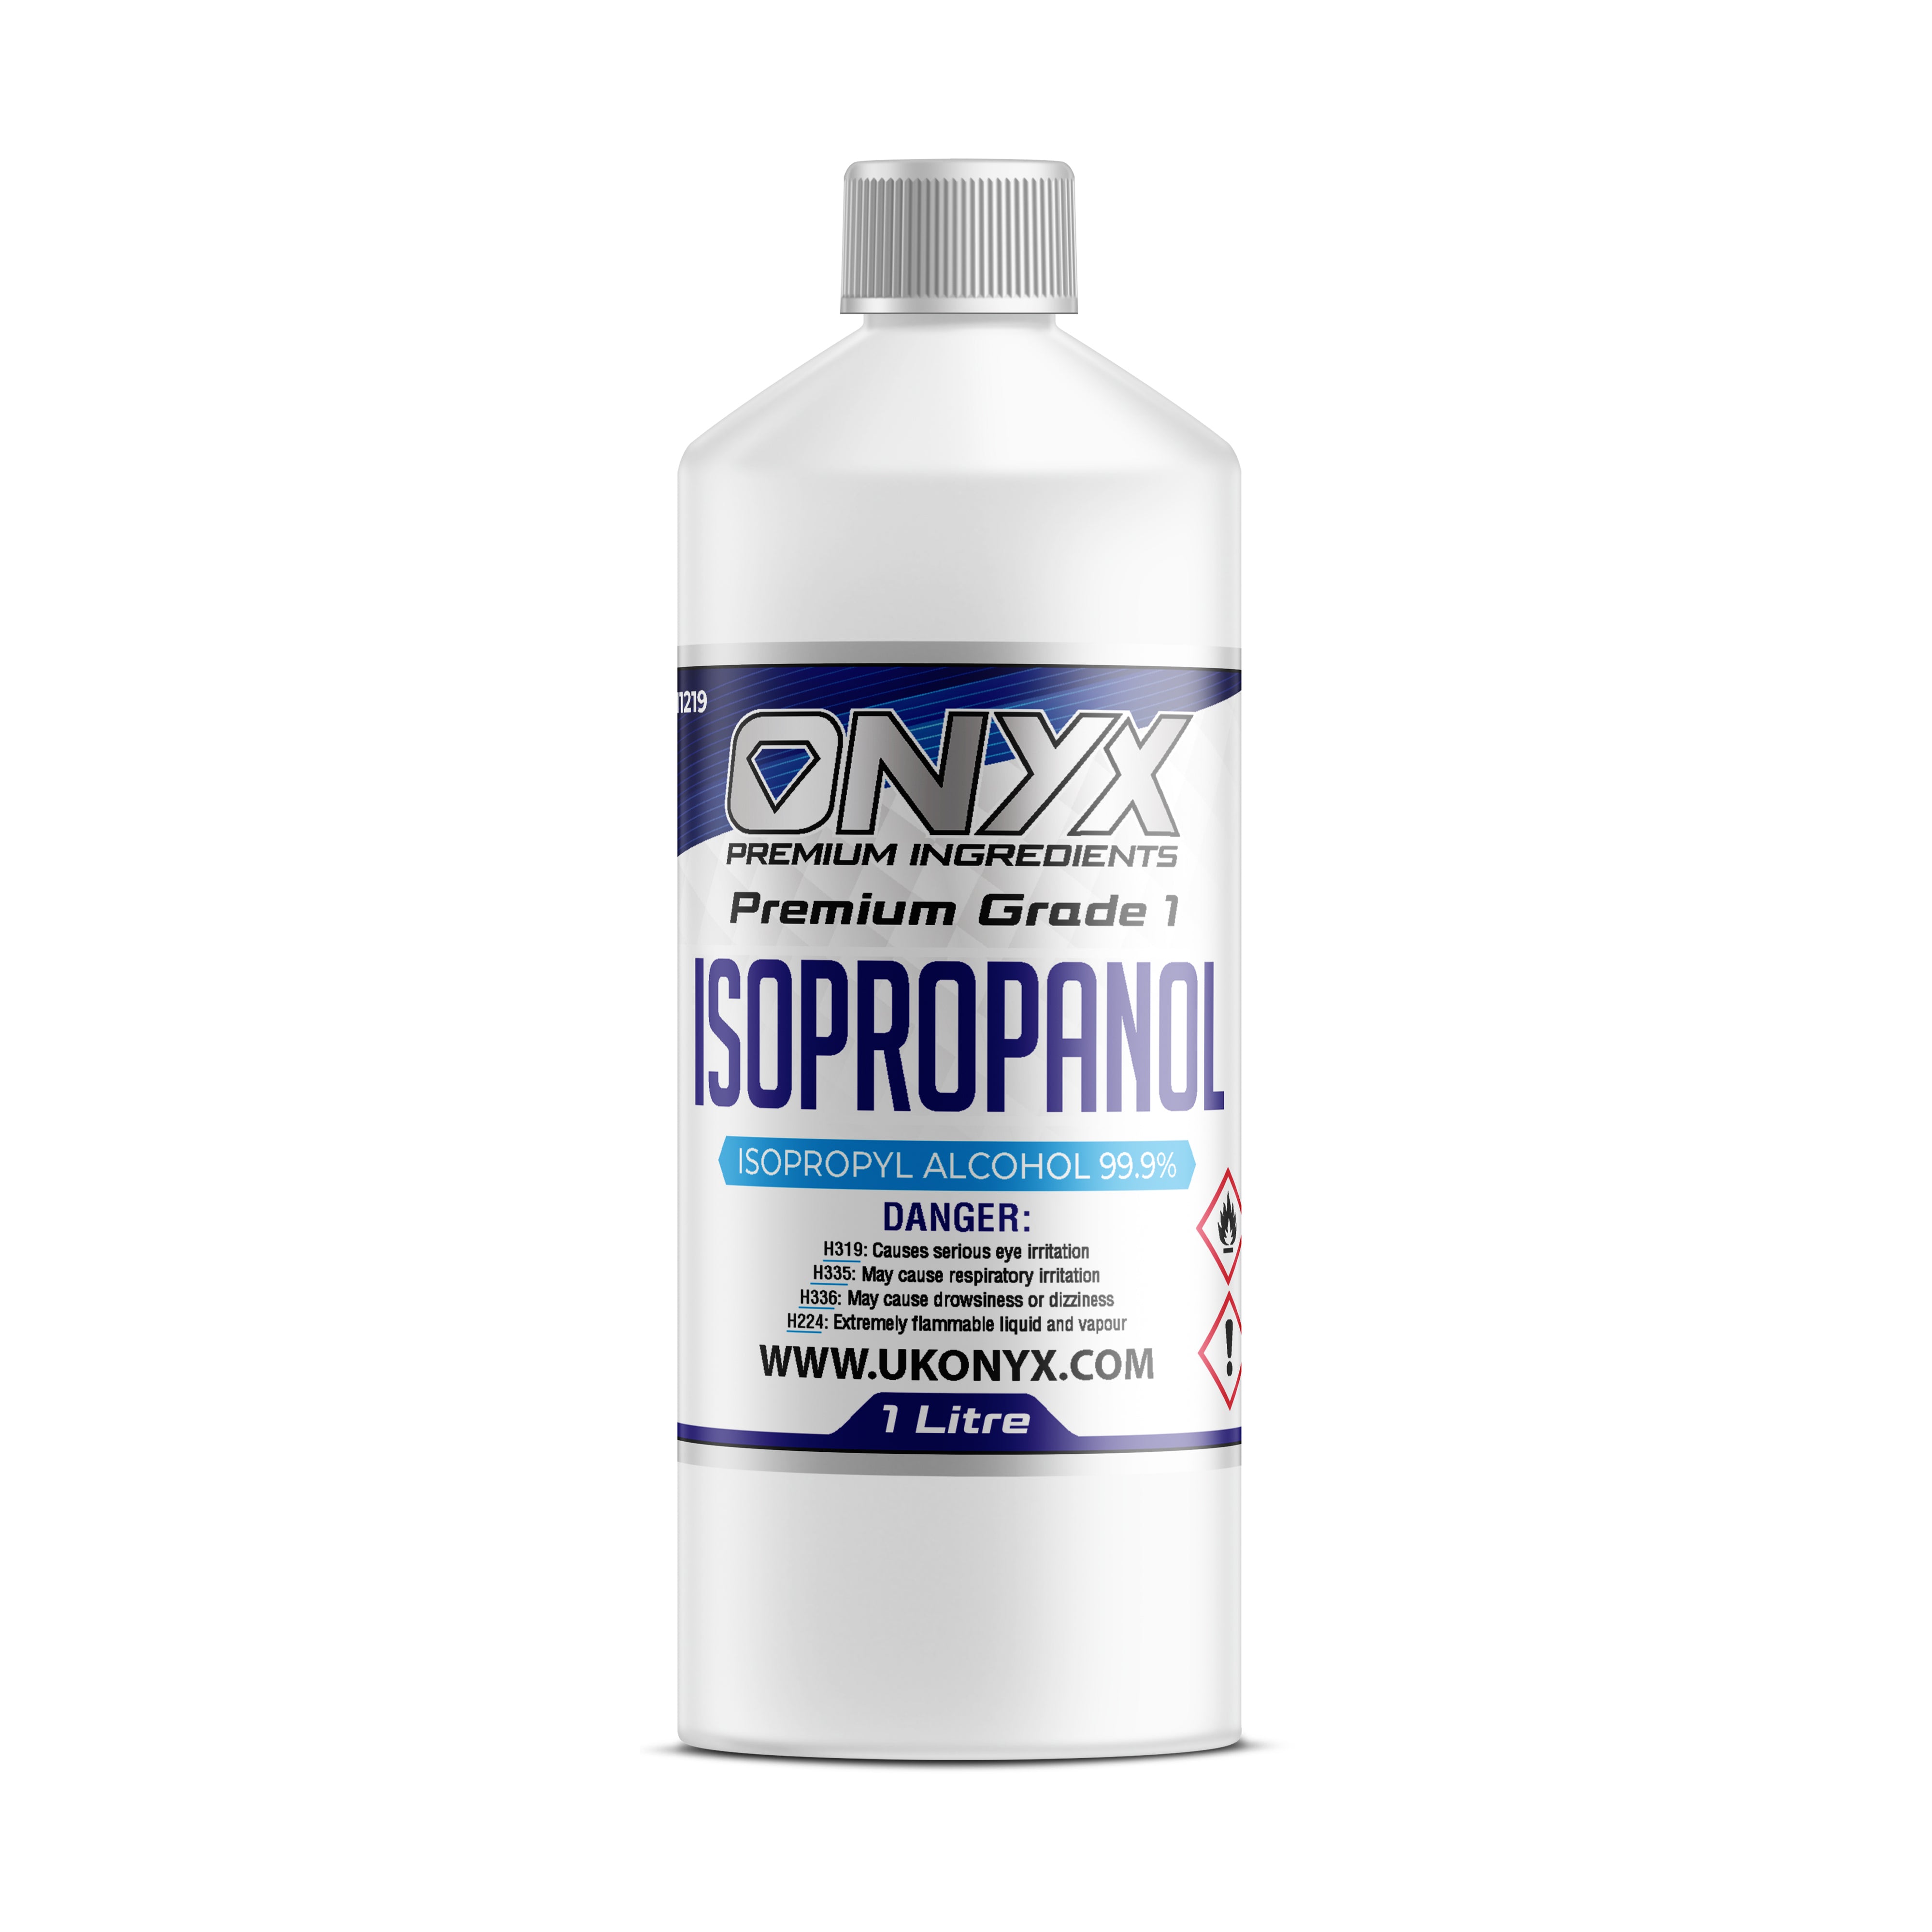 ONYX Premium Grade Isopropyl Alcohol 99.9% Cleaning Solution 1 Litre Bottle